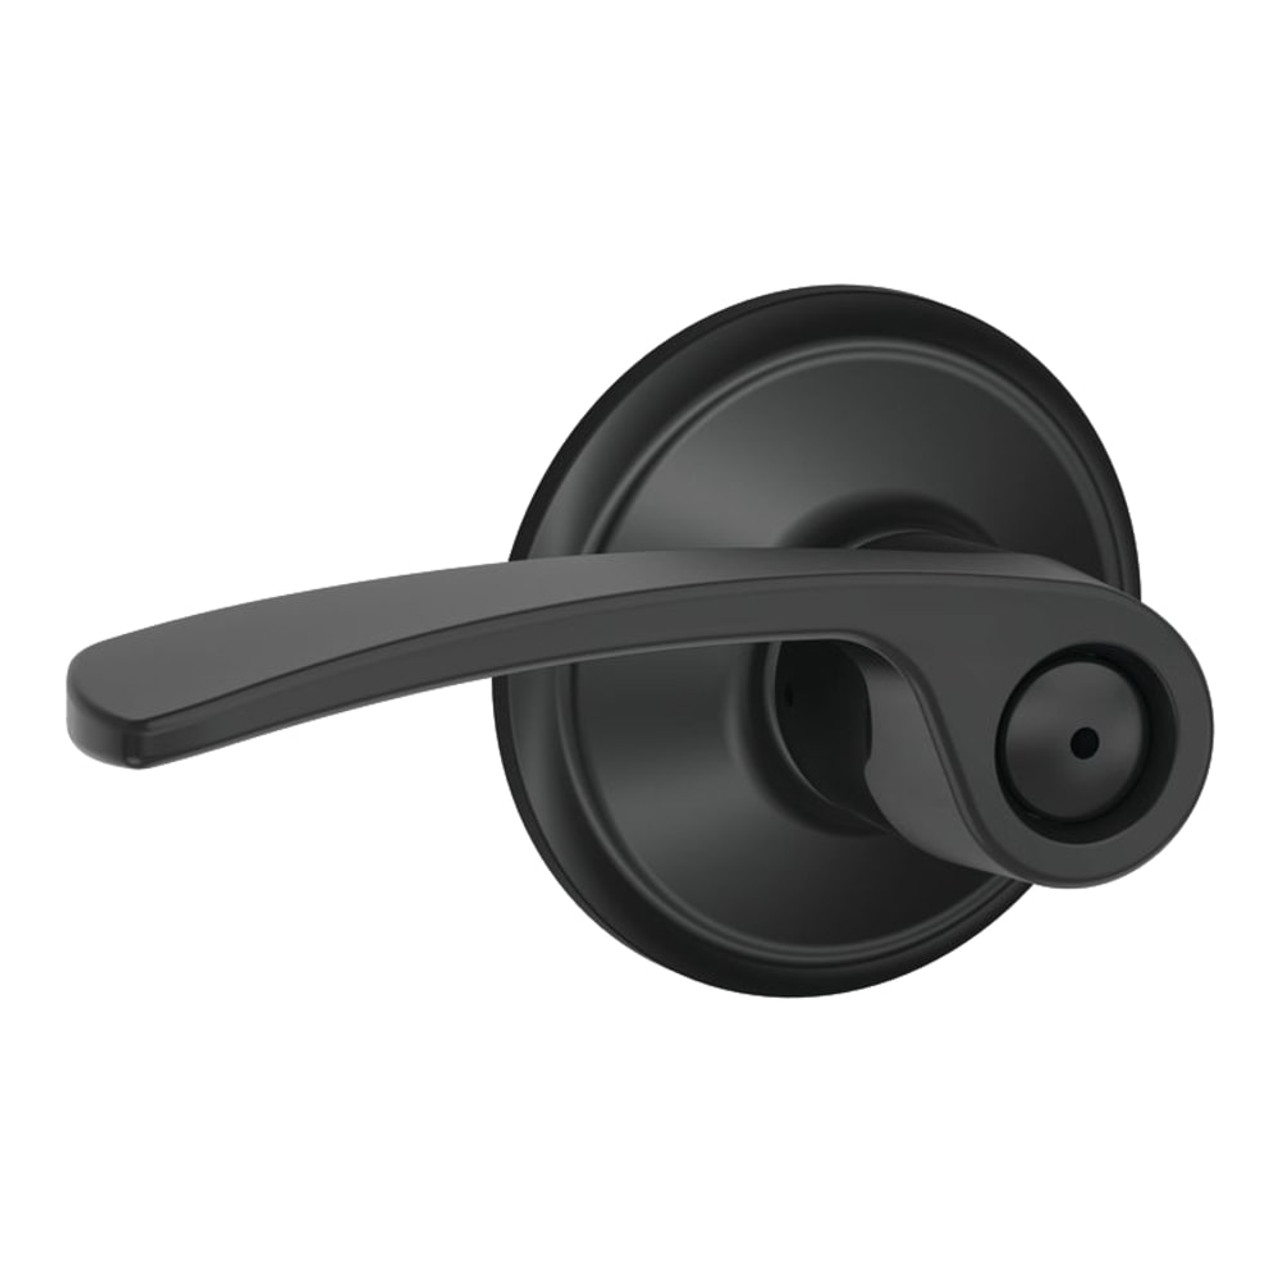 Schlage Residential F40 MER 622 Grade Privacy Lock Merano Lever Black  Finish B and H Depot Door Hardware Shop